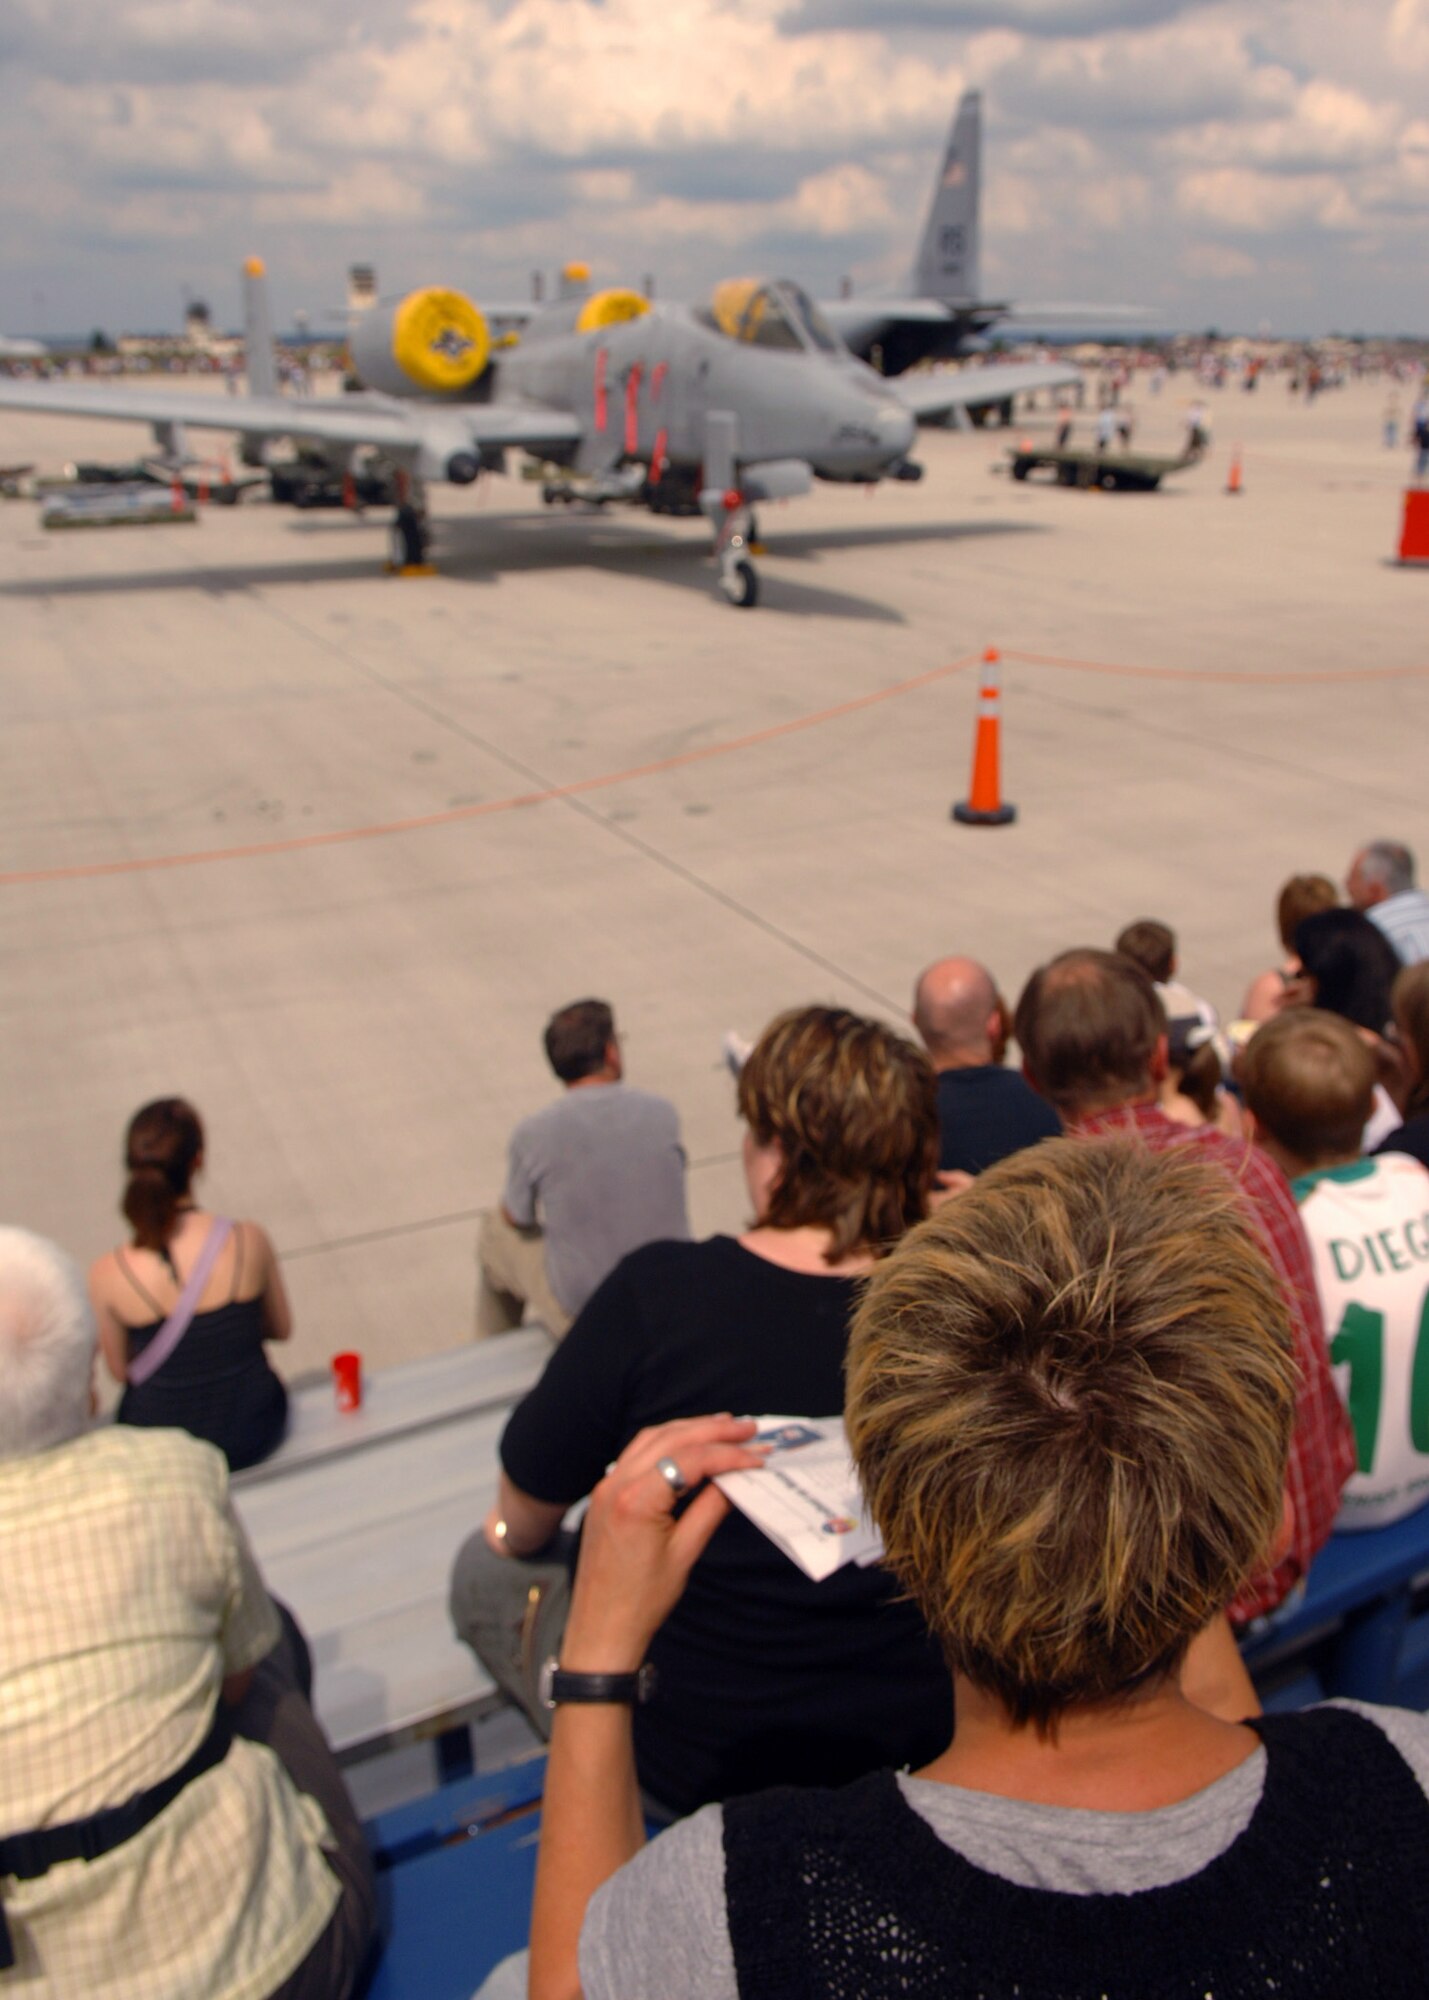 SPANGDAHLEM AIR BASE, Germany – Open House visitors sit and observe different aircraft and historical equipment, July 26, 2008. The Open House included static displays and squadron demonstrations. (U.S. Air Force photo by Airman Staci Miller)